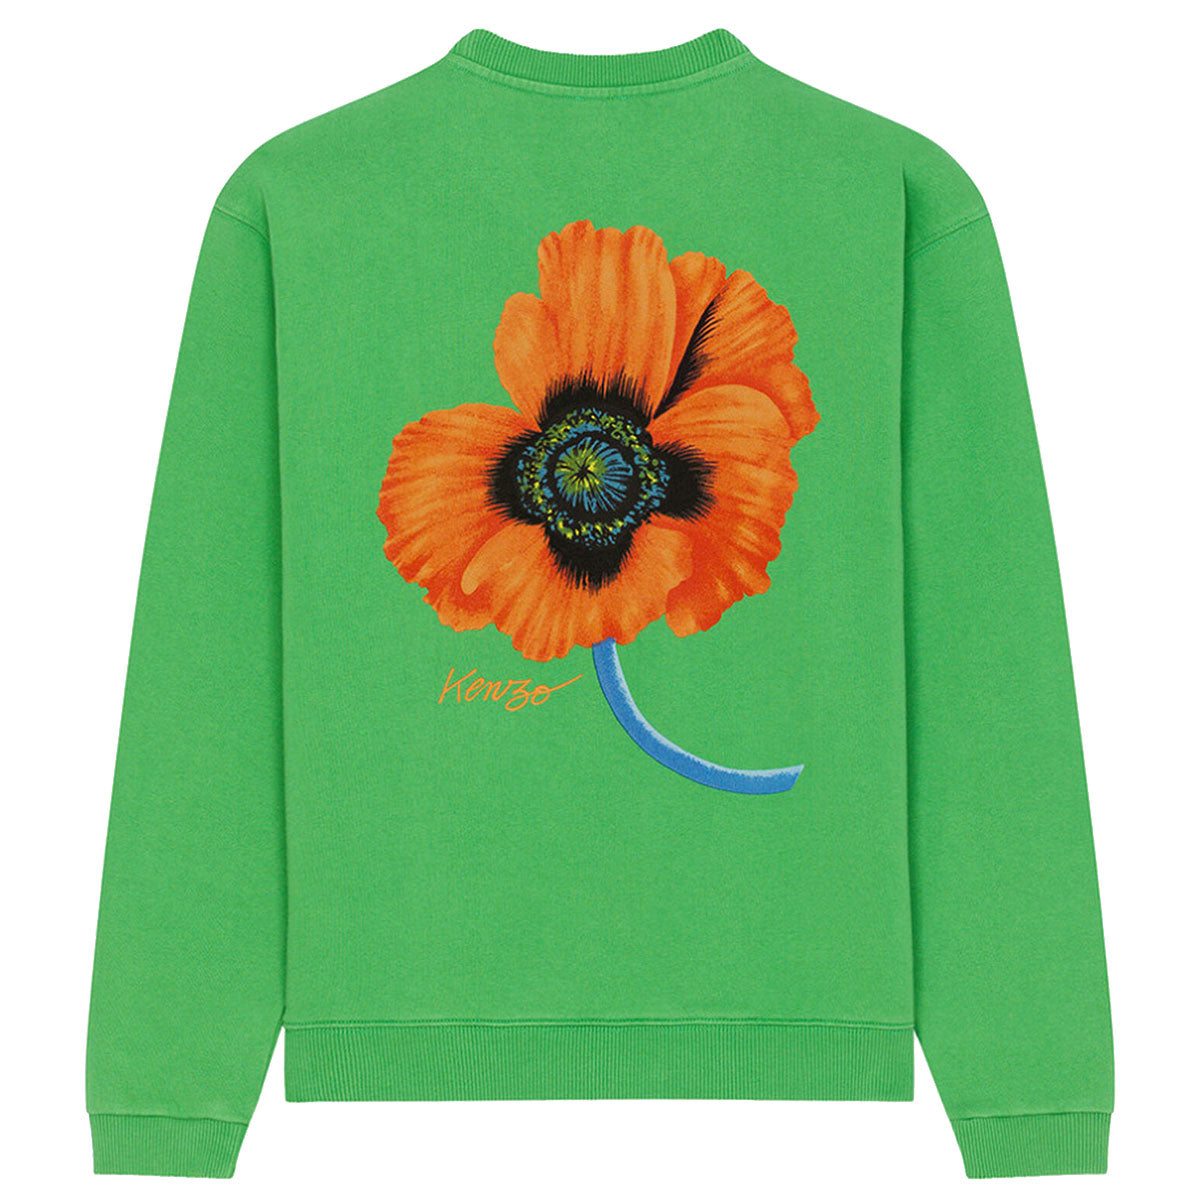 Kenzo Poppy' Sweat – Why are you here?